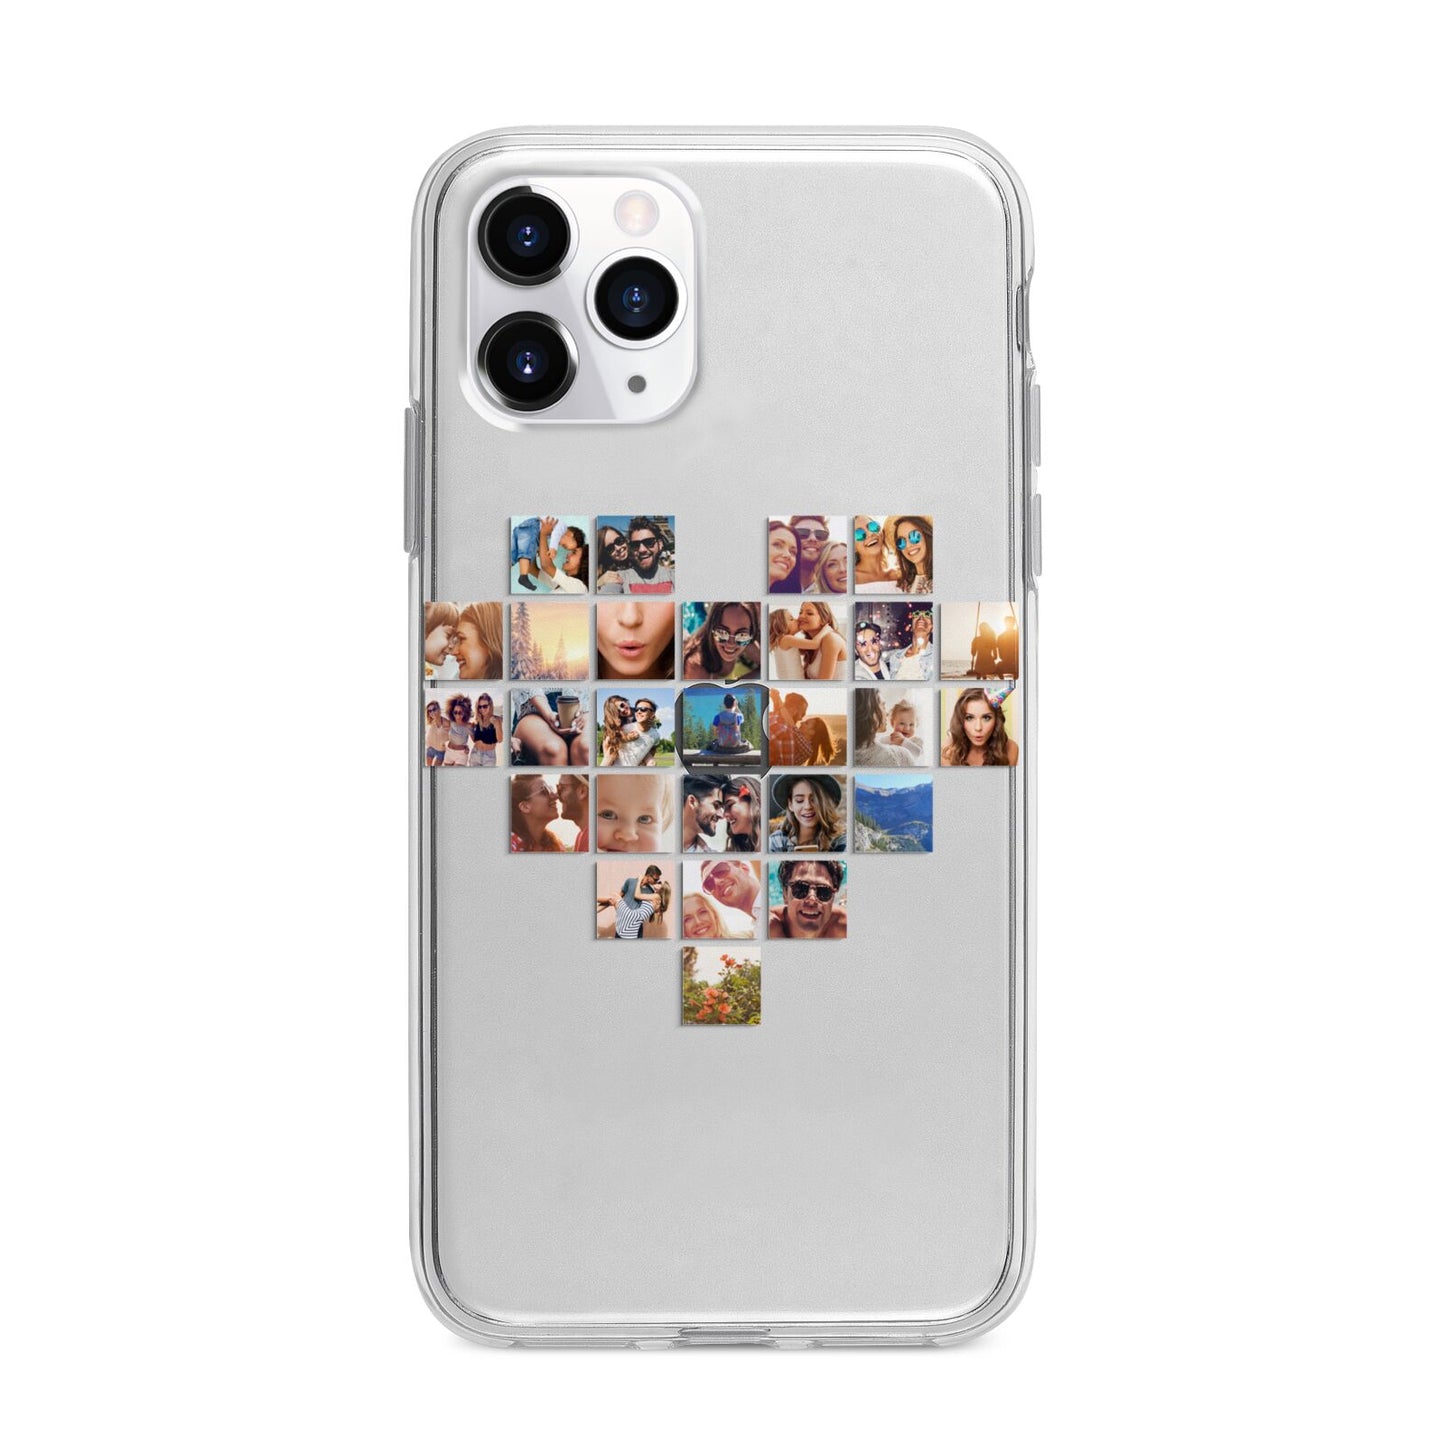 Large Heart Photo Montage Upload Apple iPhone 11 Pro Max in Silver with Bumper Case